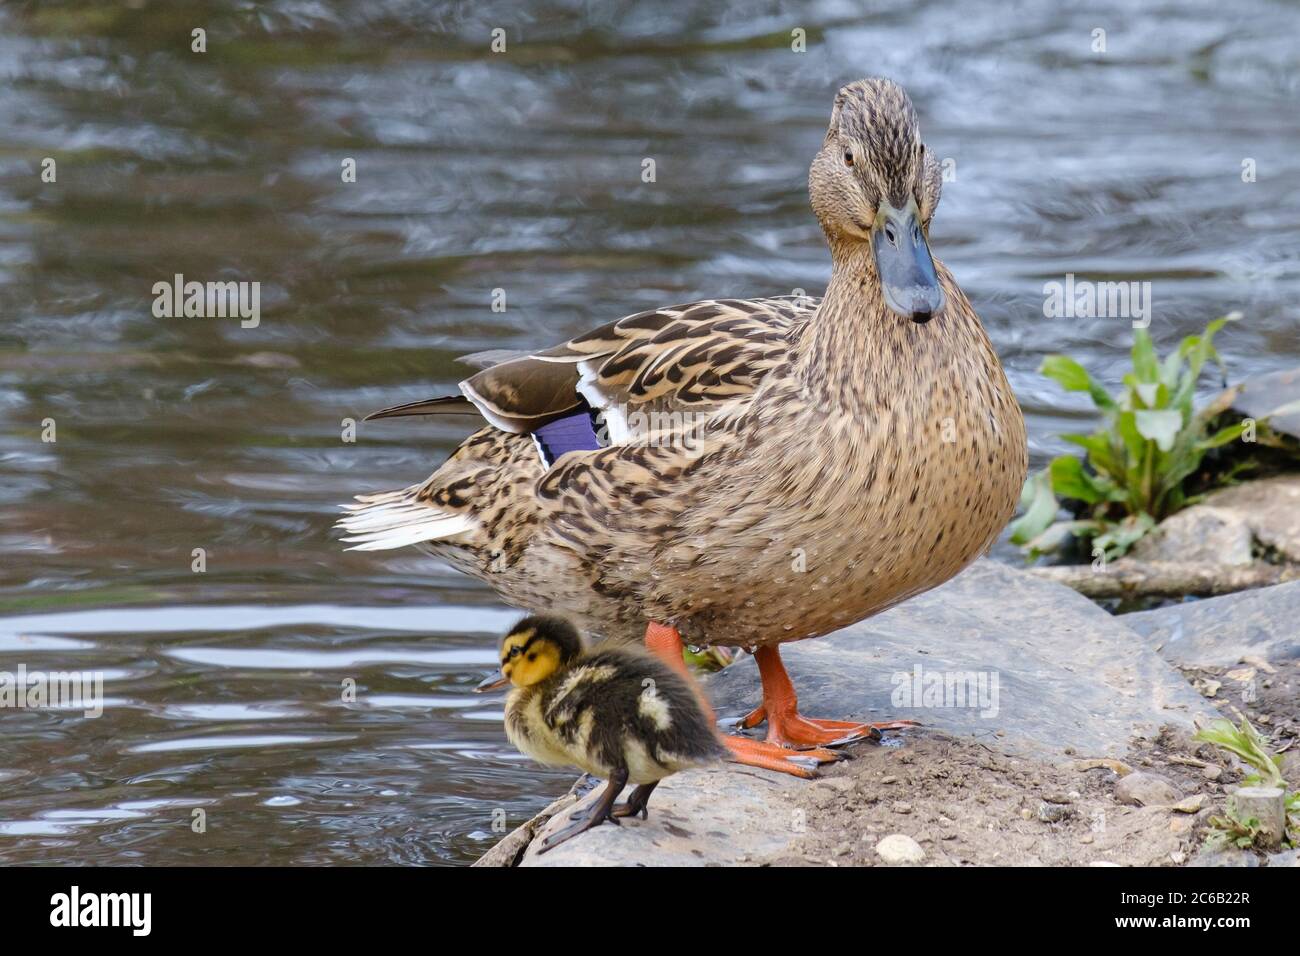 Female Mallard Duck stands on rocks by the edge of the water with one duckling next to her. Stock Photo